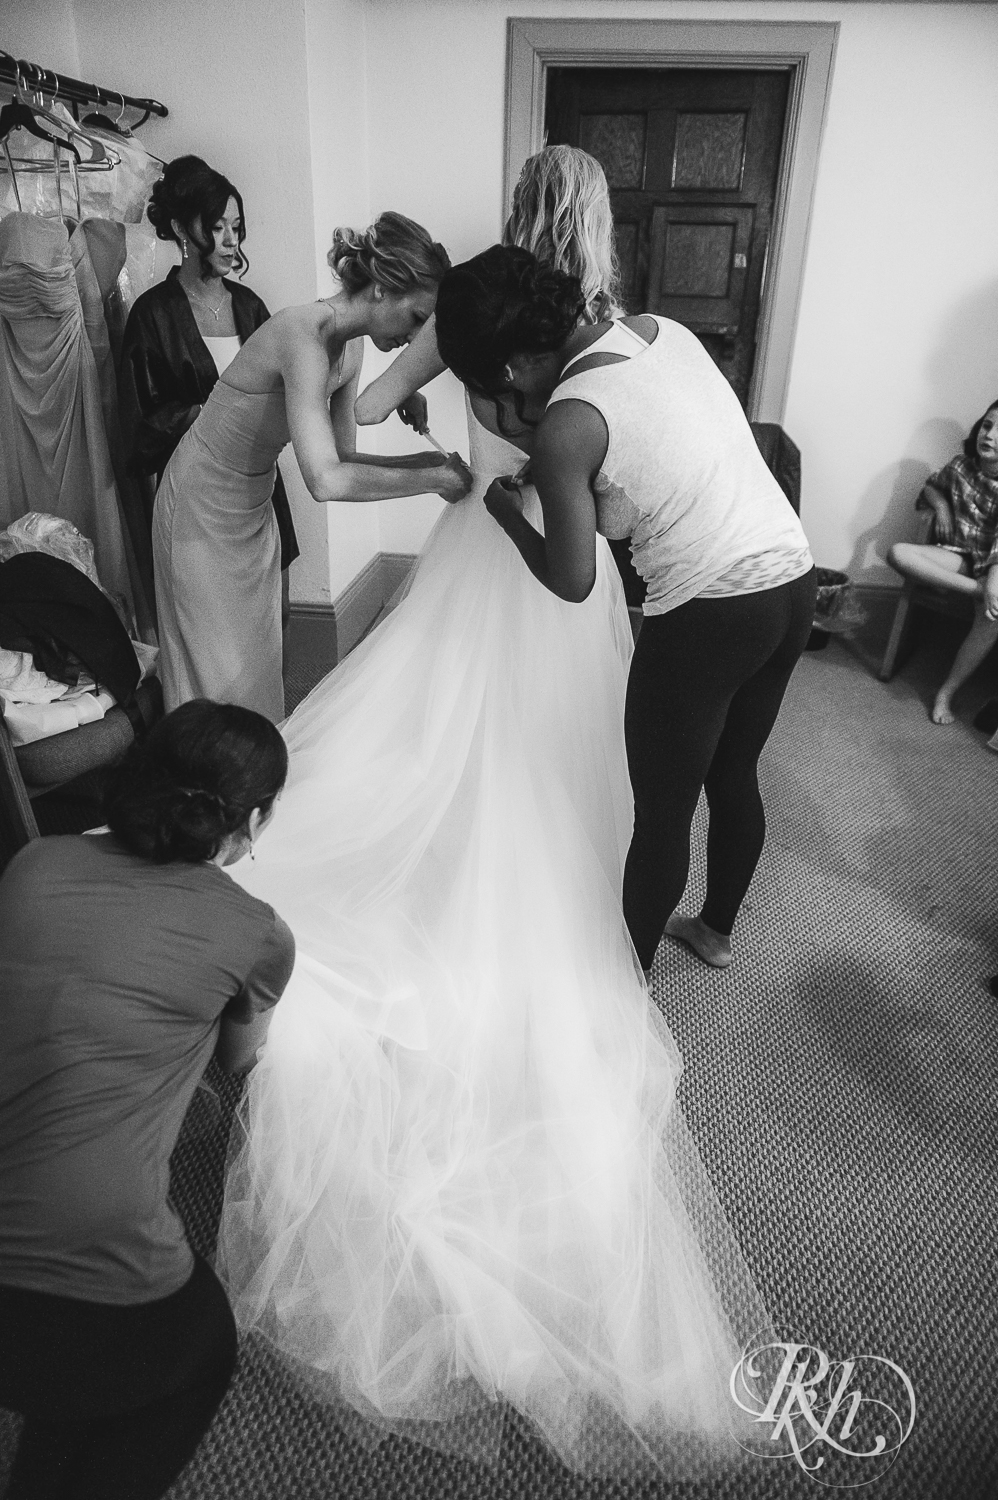 Wedding party helps bride get dressed on her wedding day before the ceremony.